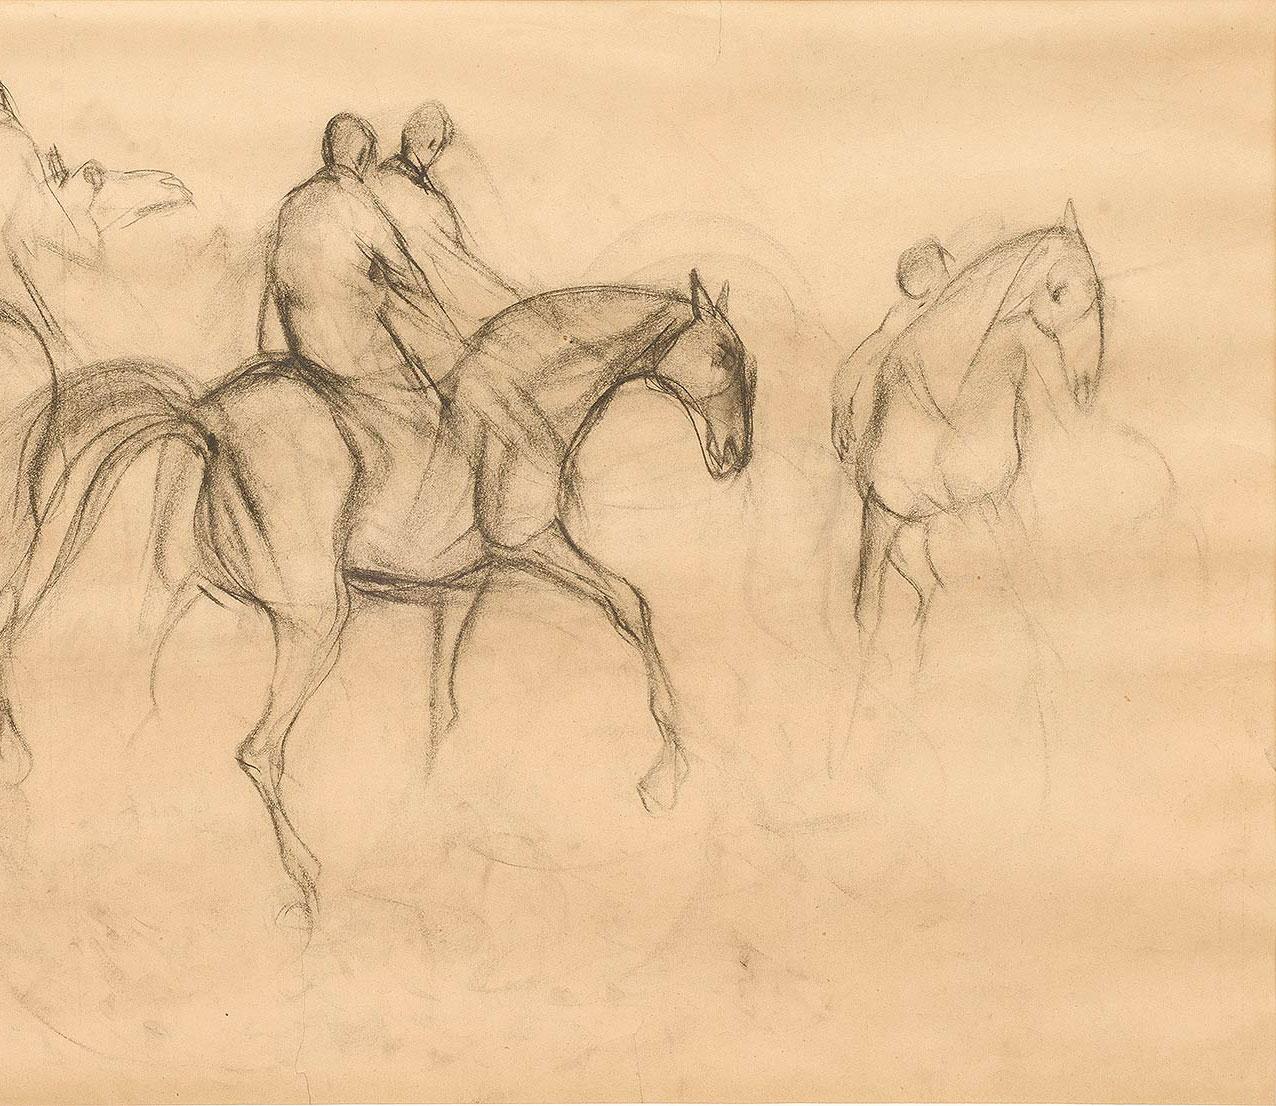 Sunil Das - Early Horses X - 34 x 20.75 inches (unframed size)
Charcoal on paper
( Framed & Delivered )

Sunil Das was one of India's most important postmodernist painters and rose to prominence through his drawings of horses. He captured their